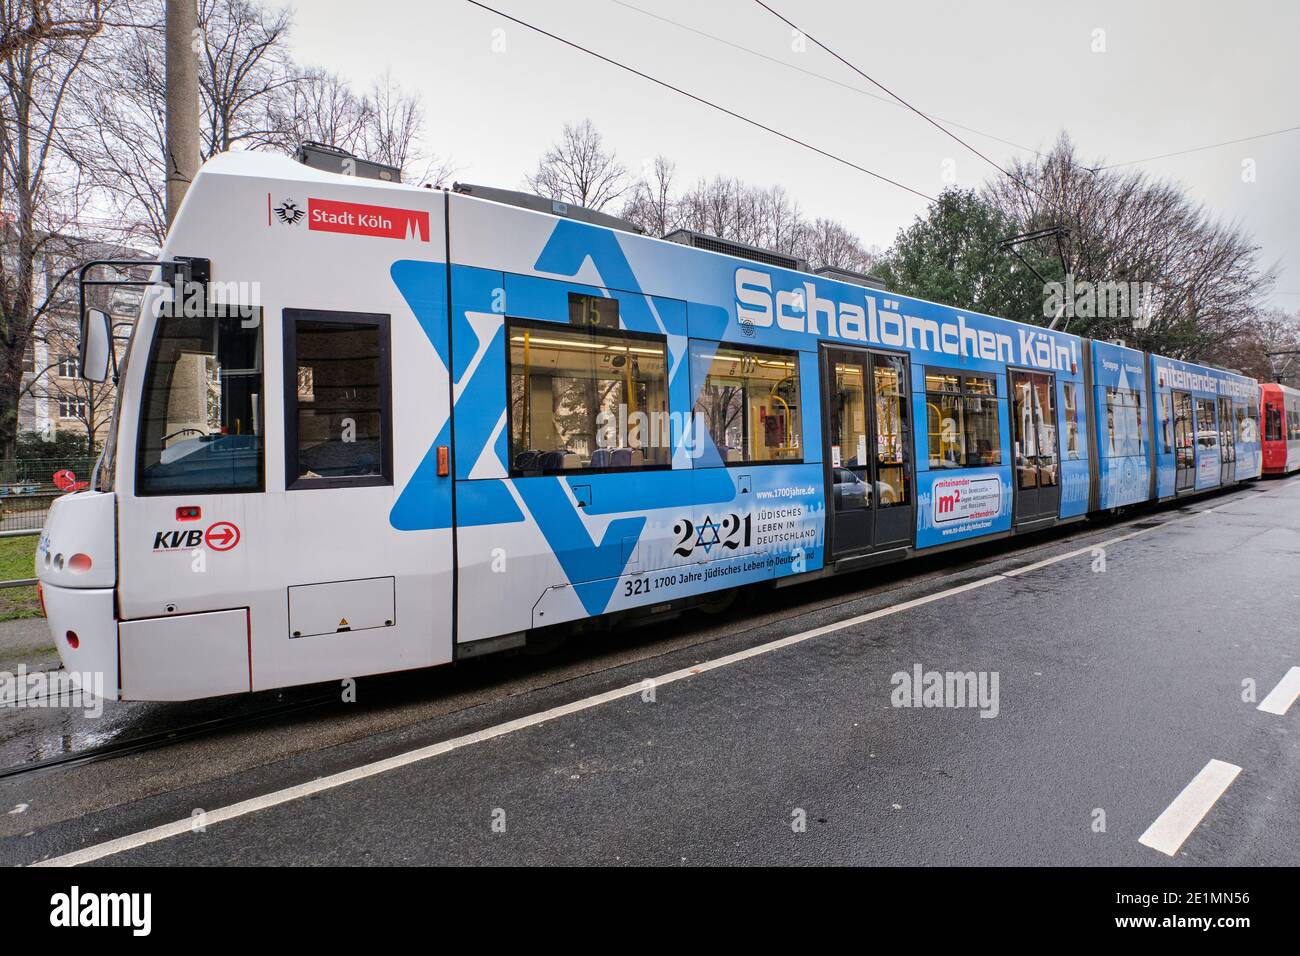 With a specially designed train, the city of Cologne, the synagogue community and the public transport company are setting an example for democracy Stock Photo